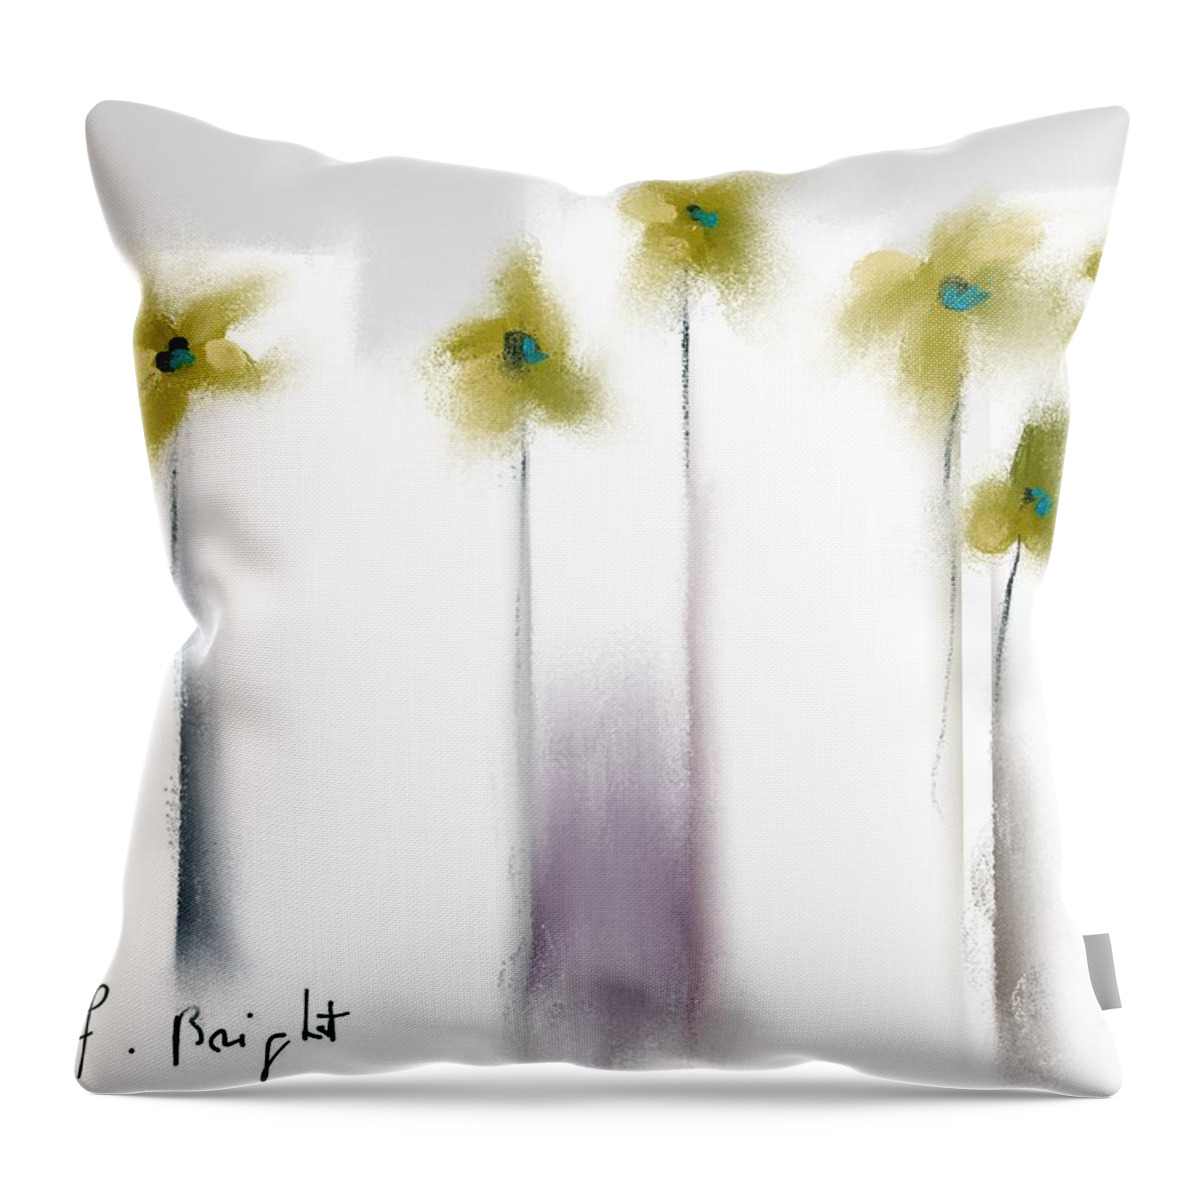 Pinned Throw Pillow featuring the photograph Pinned by Frank Bright